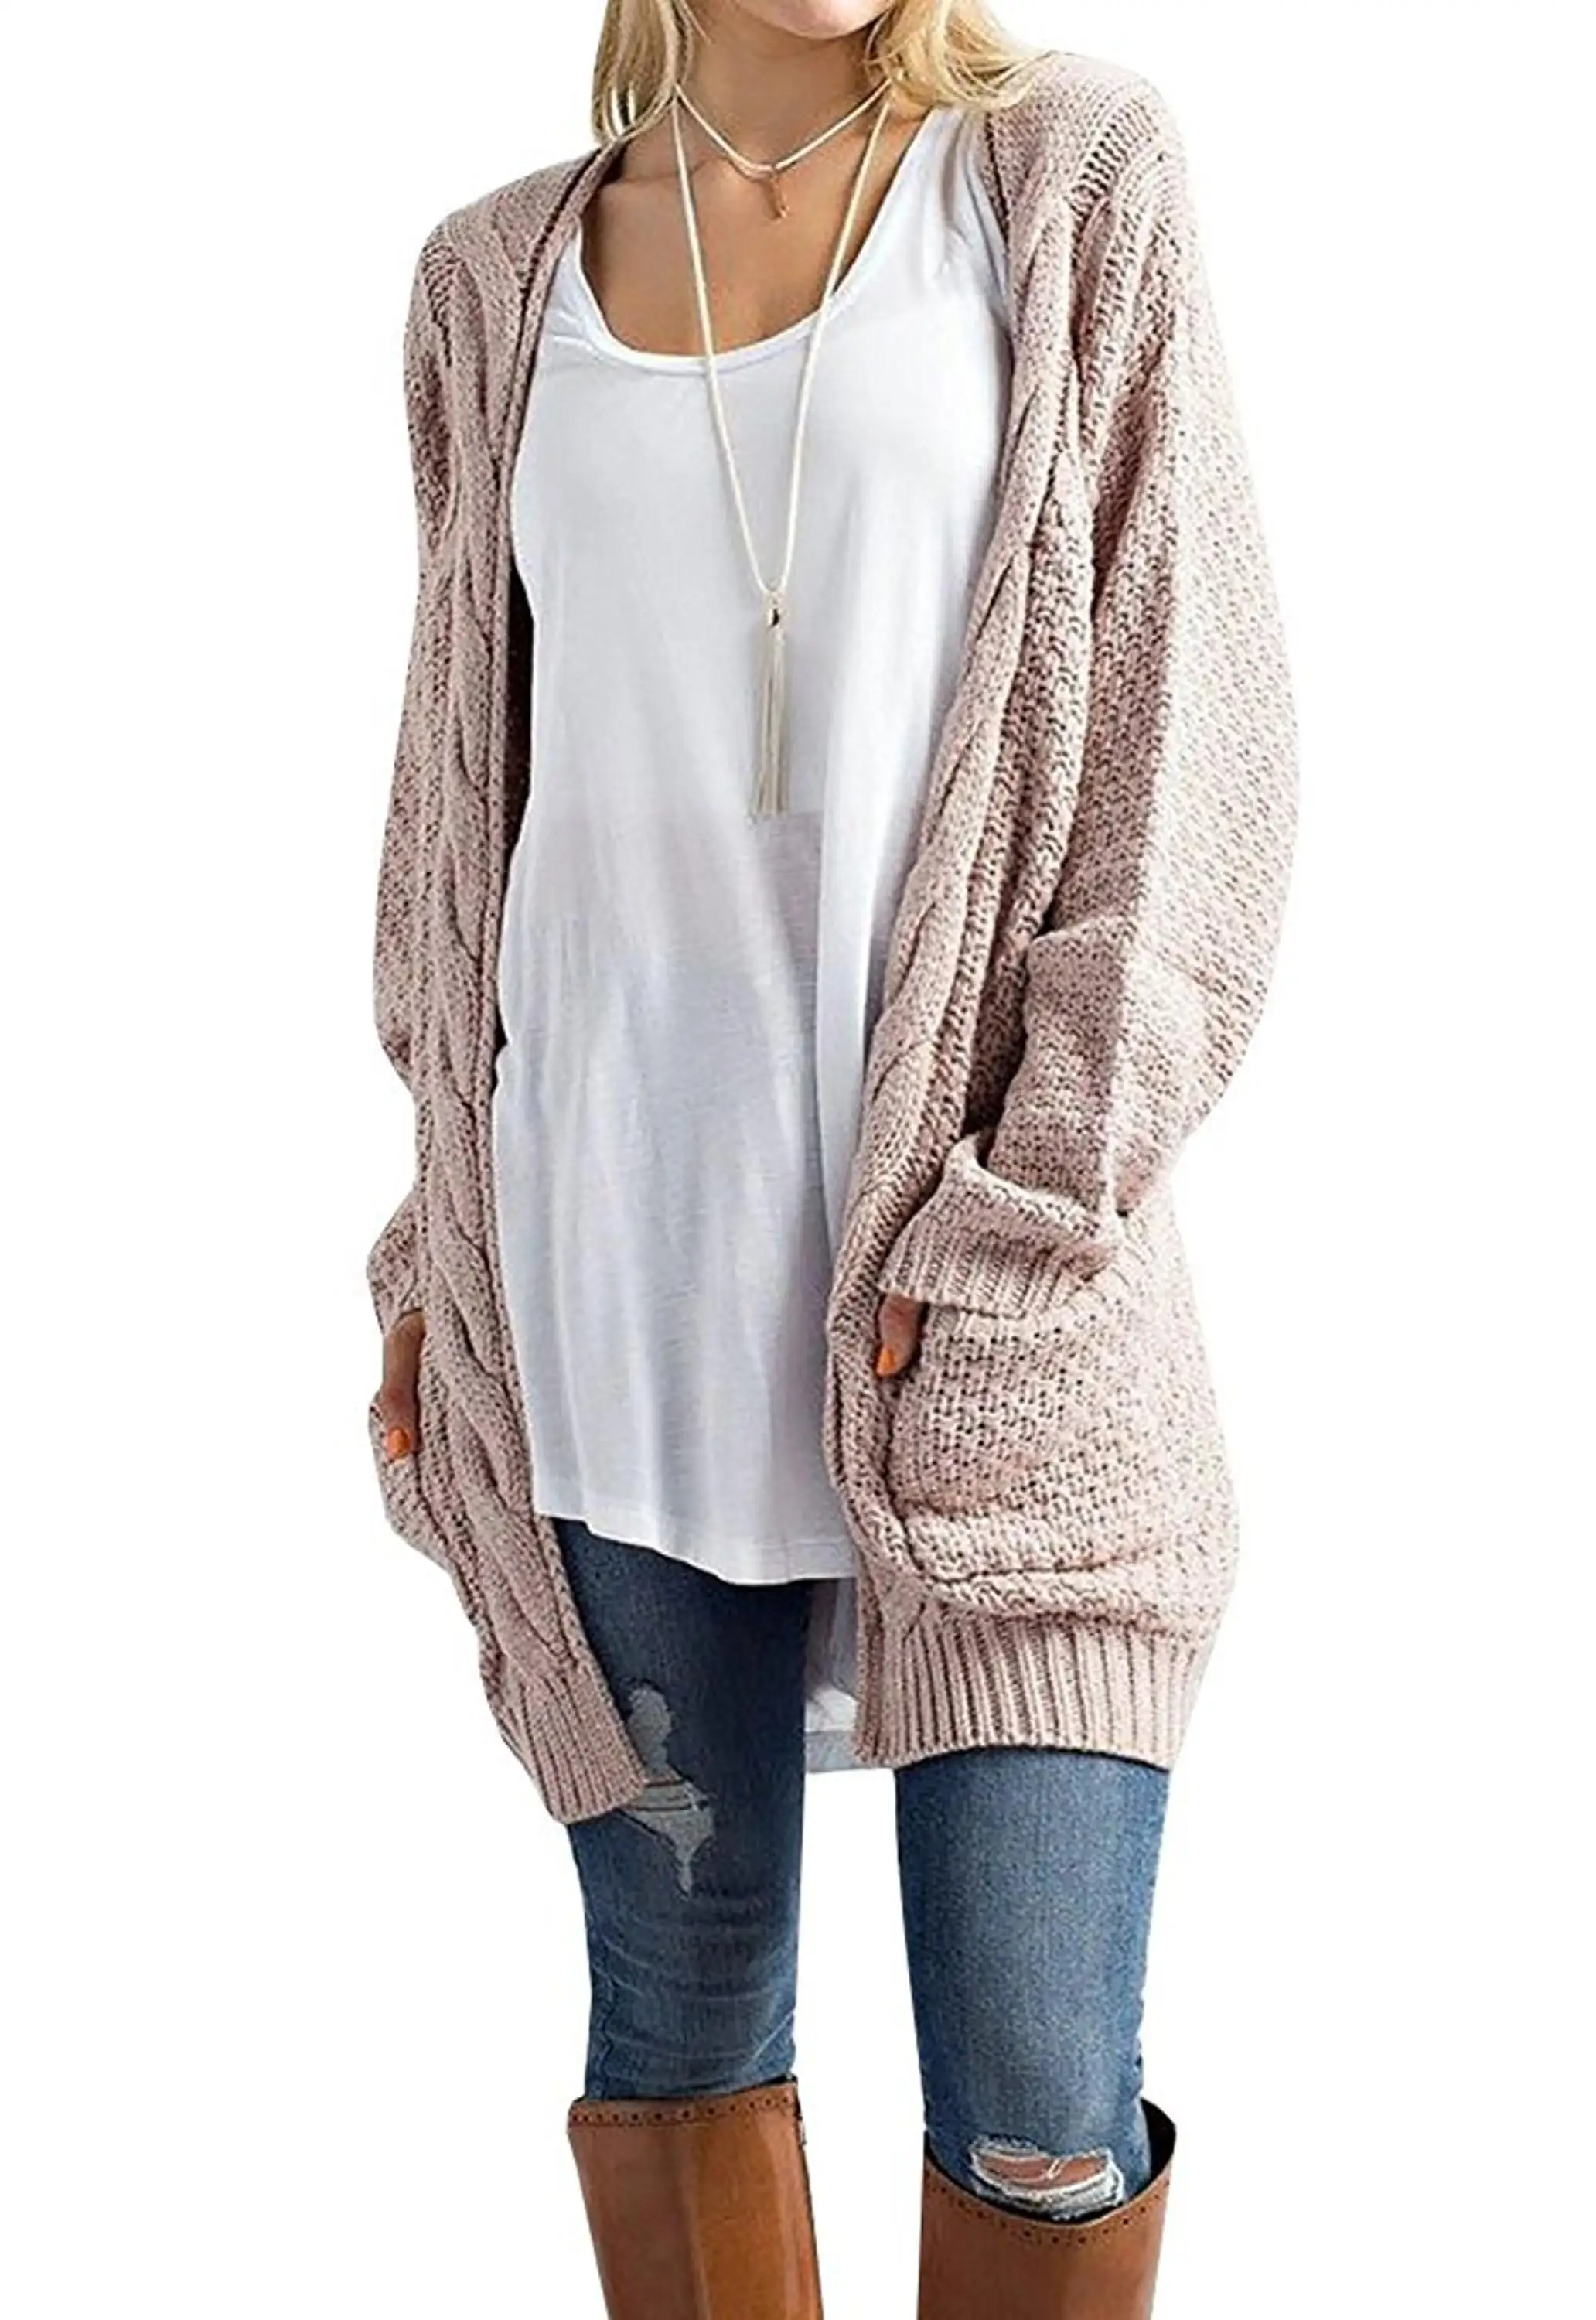 Women's Shawl Collar Thin Striped Open Front Cardigan - Buy Open Front ...